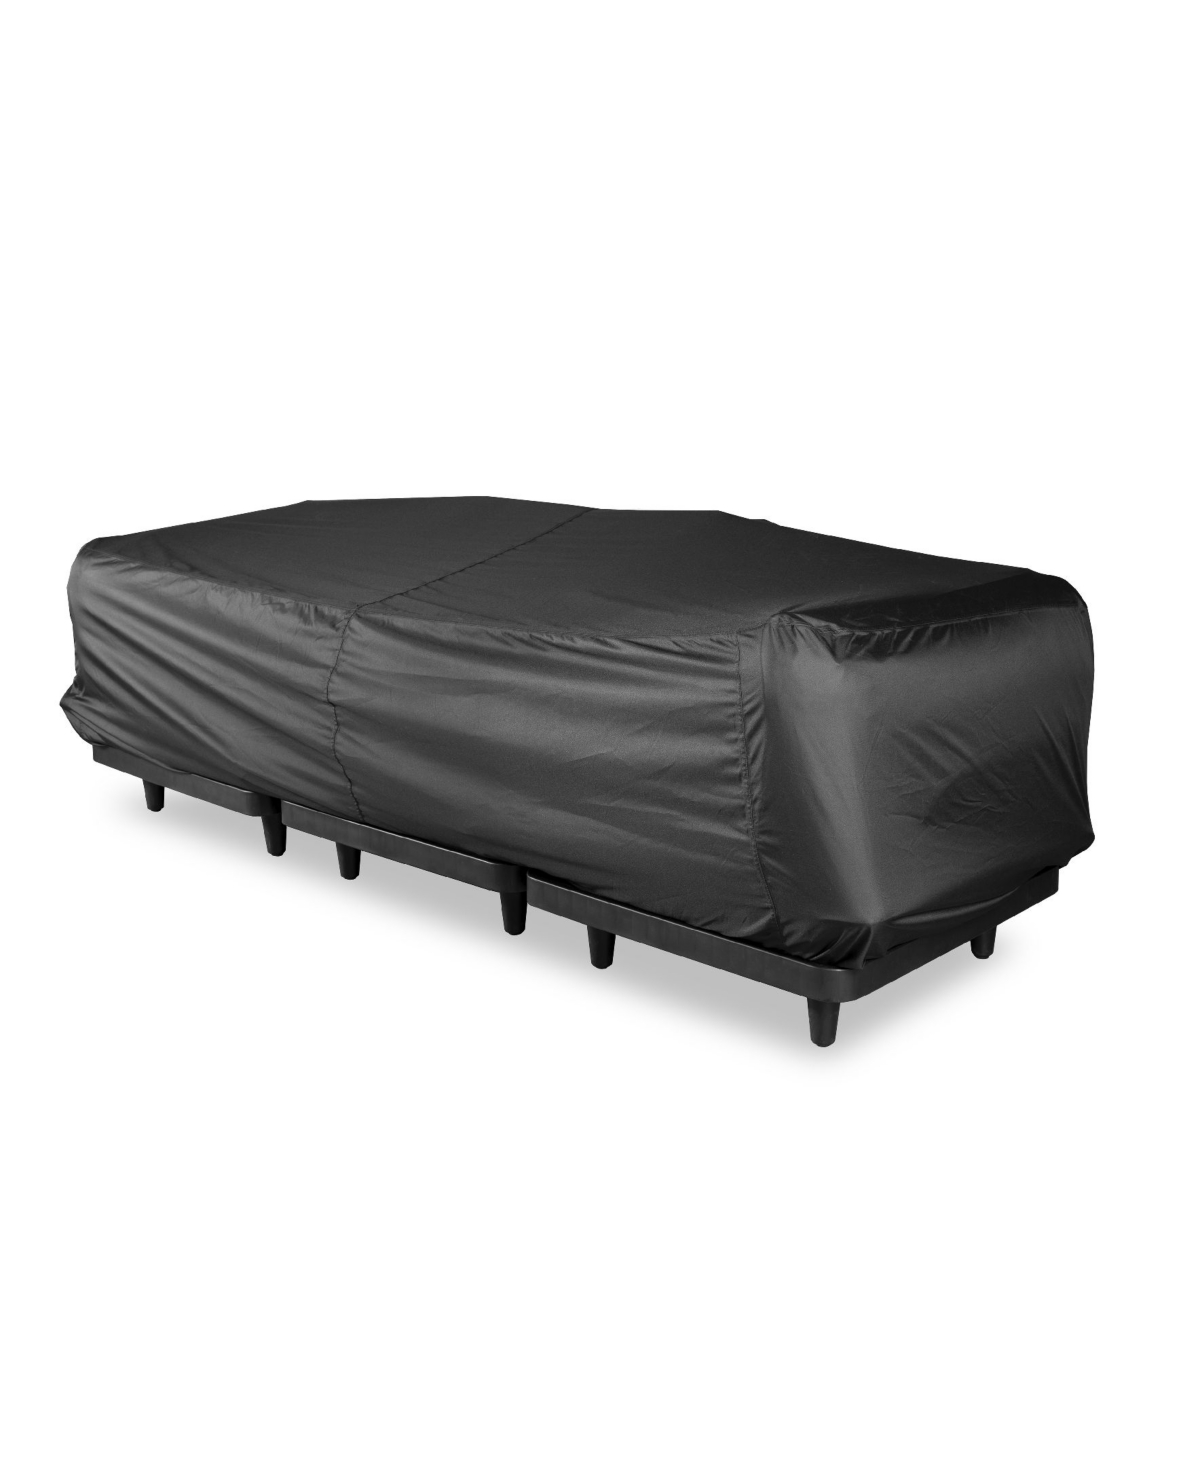 Fatboy Paletti Outdoor Modular 3-Seat Cover Lounge